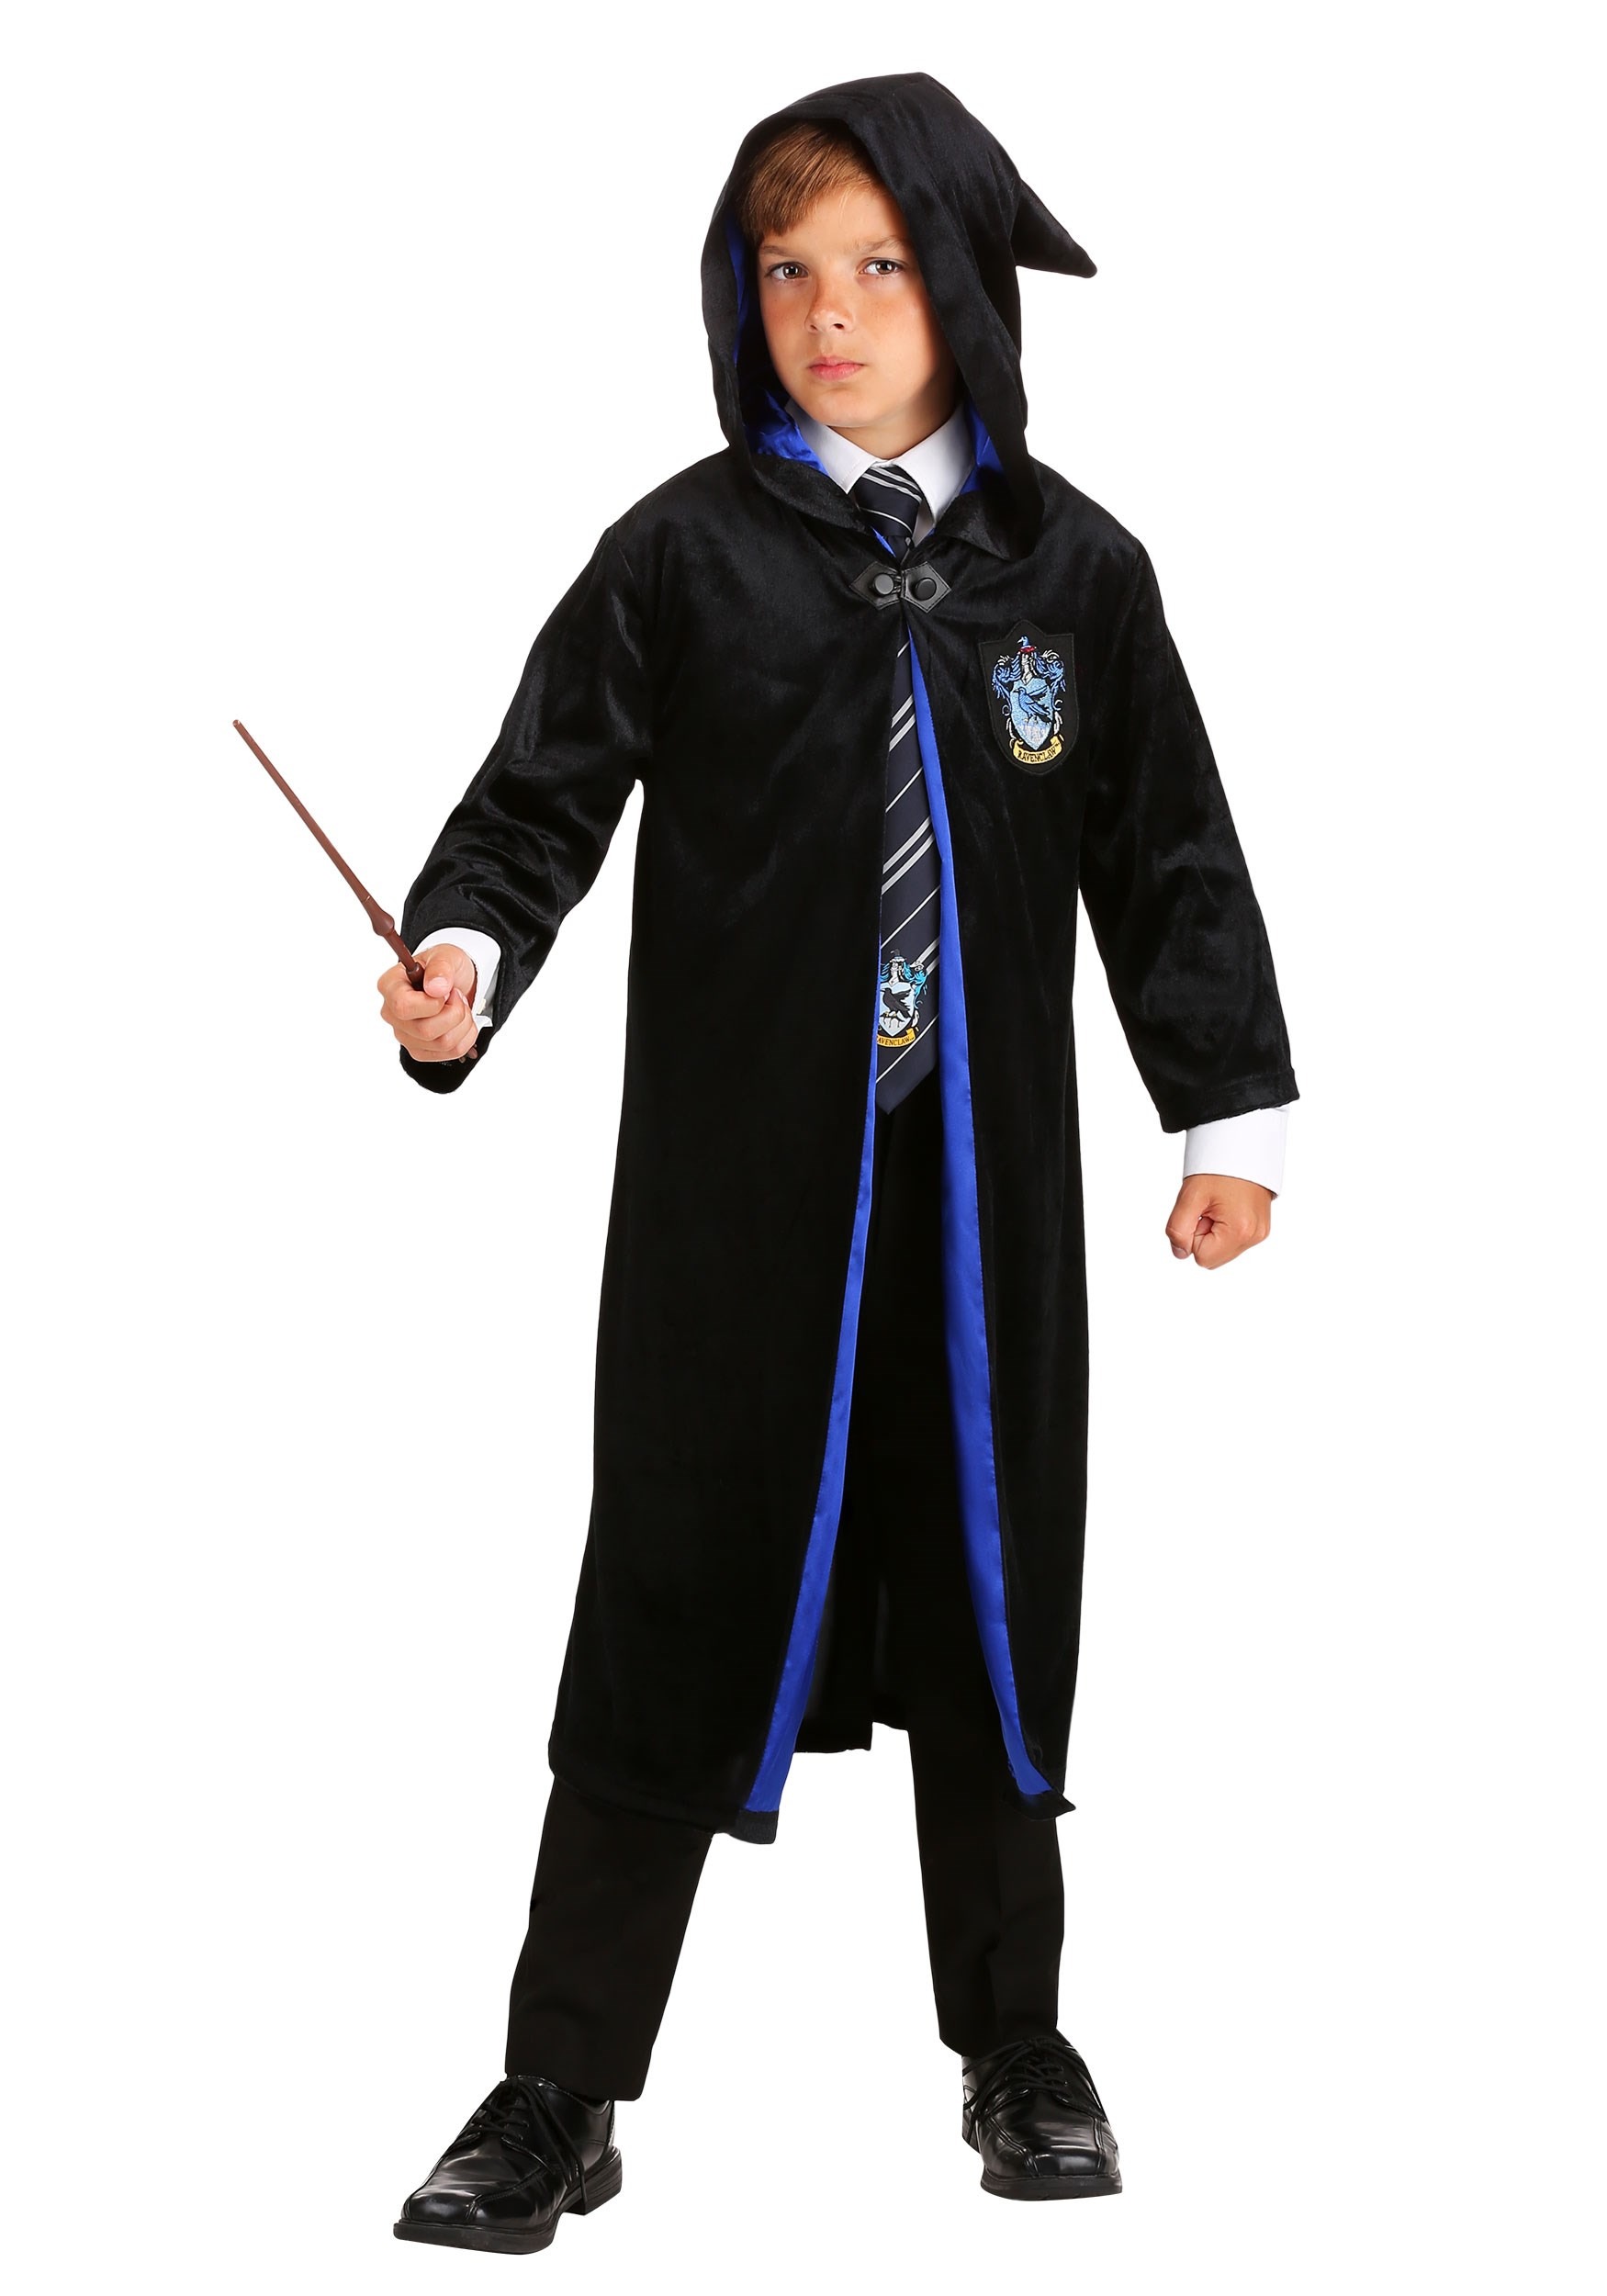 Ravenclaw Robe Deluxe - Adult 